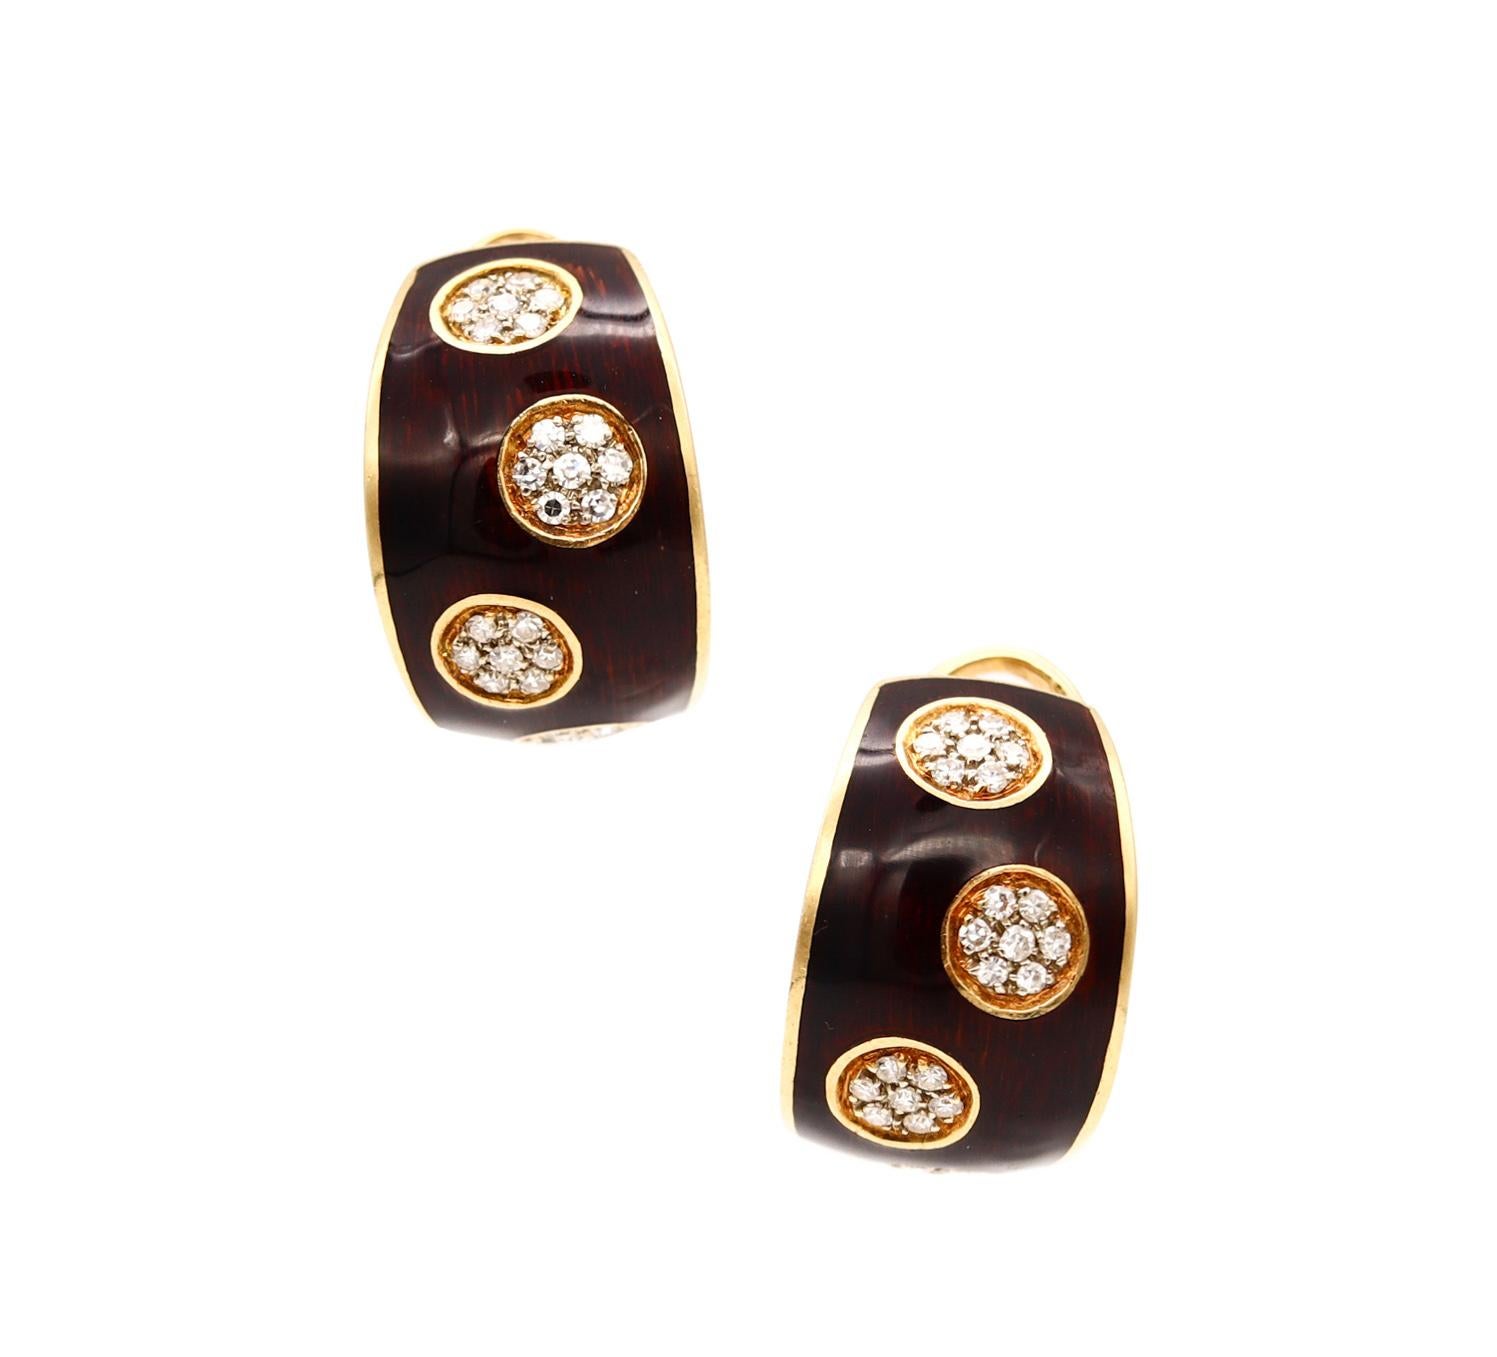 Pair of earrings designed by Van Cleef & Arpels.

Beautiful vintage pieces, created by the iconic Parisian house of Van Cleef & Arpels, circa 1970. This pair of earrings has been crafted in solid yellow gold of 18 karats and embellished with